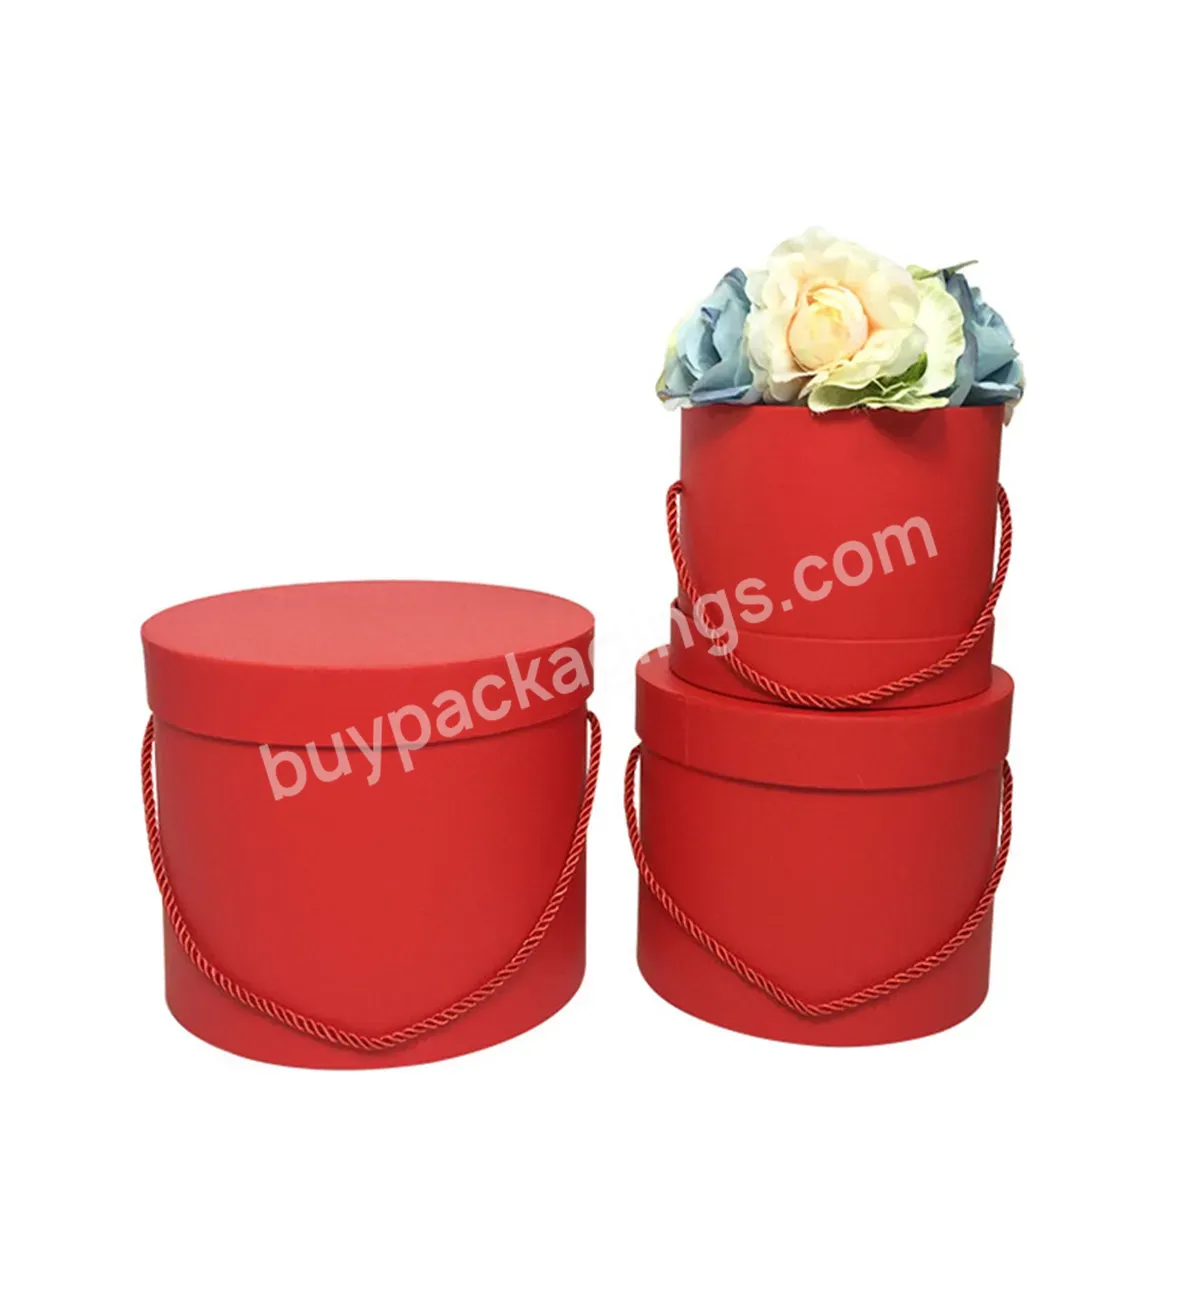 Hot Selling 3pcs/set Round Hug Bucket Gift Box Portable Flower Box With Hand Rope For Valentine's Day - Buy Hot Selling 3pcs/set Round Hug Bucket Gift Box,Portable Flower Box With Hand Rope,Flower Box With Hand Rope For Valentine's Day.